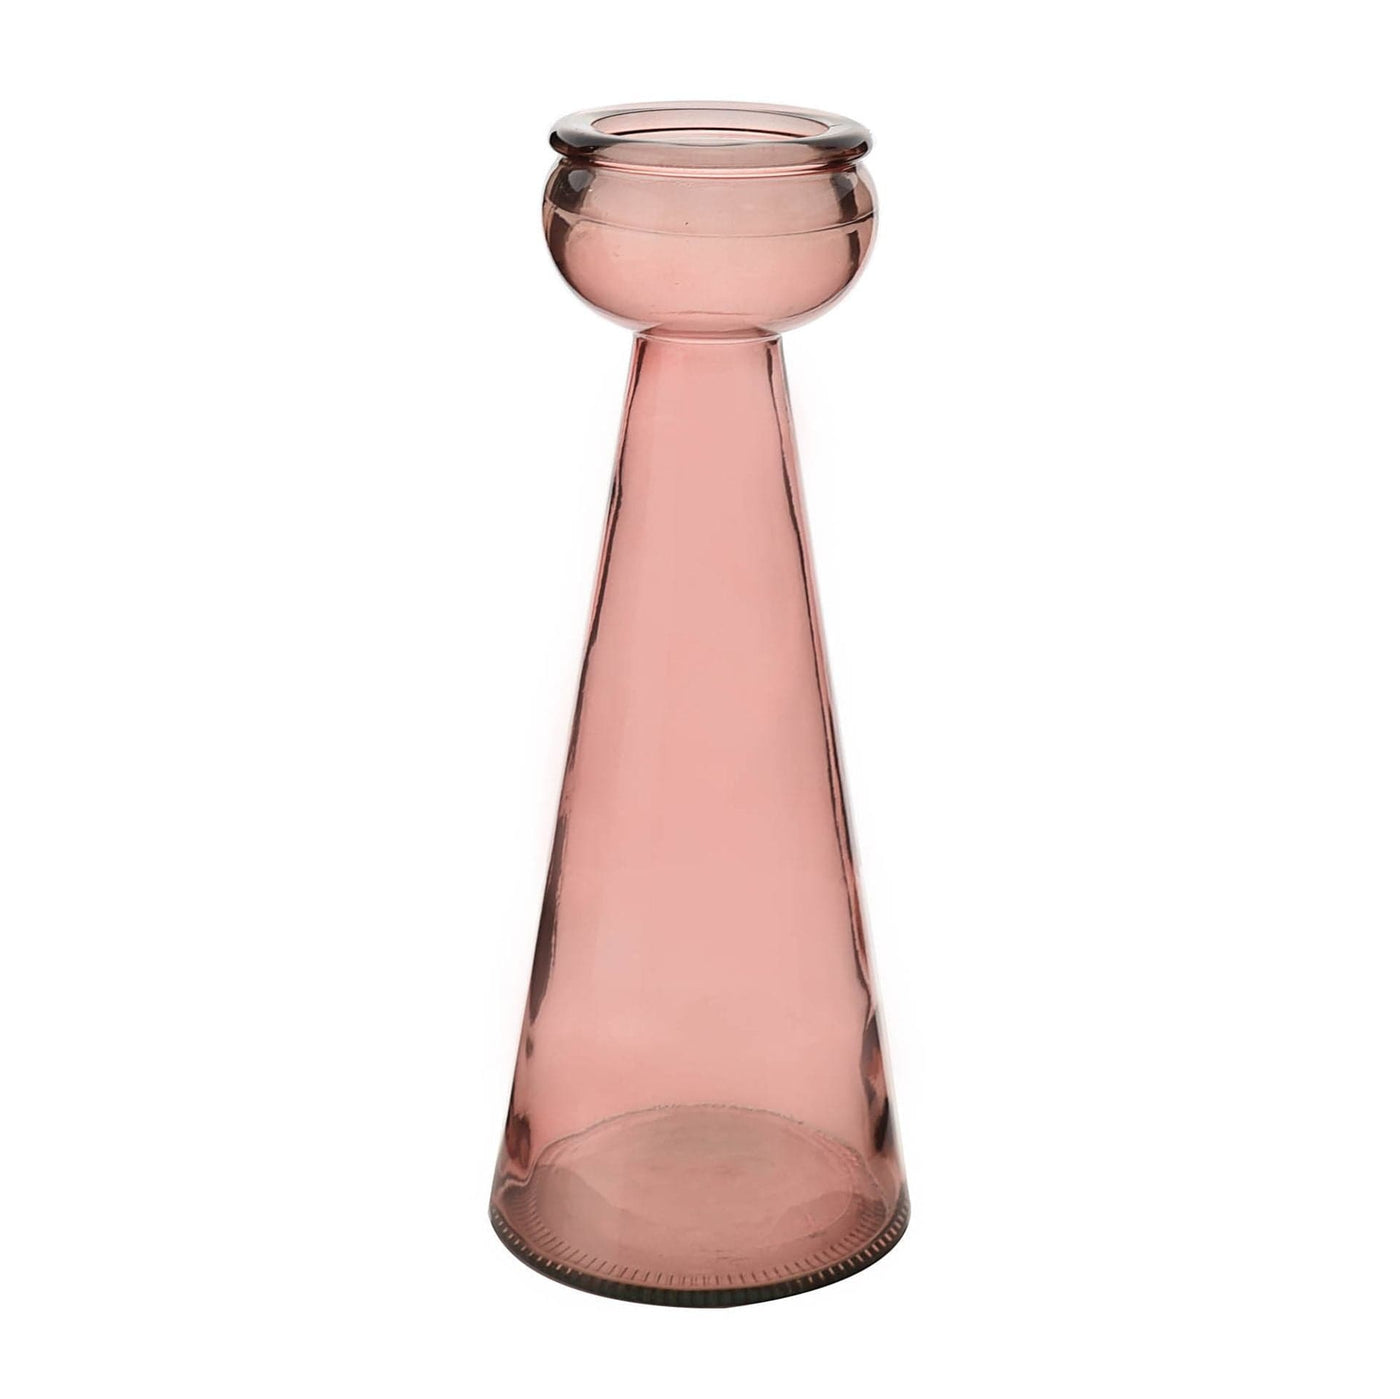 Widdop Gifts Home accessories Recycled Glass Large Tapered Pink Vase